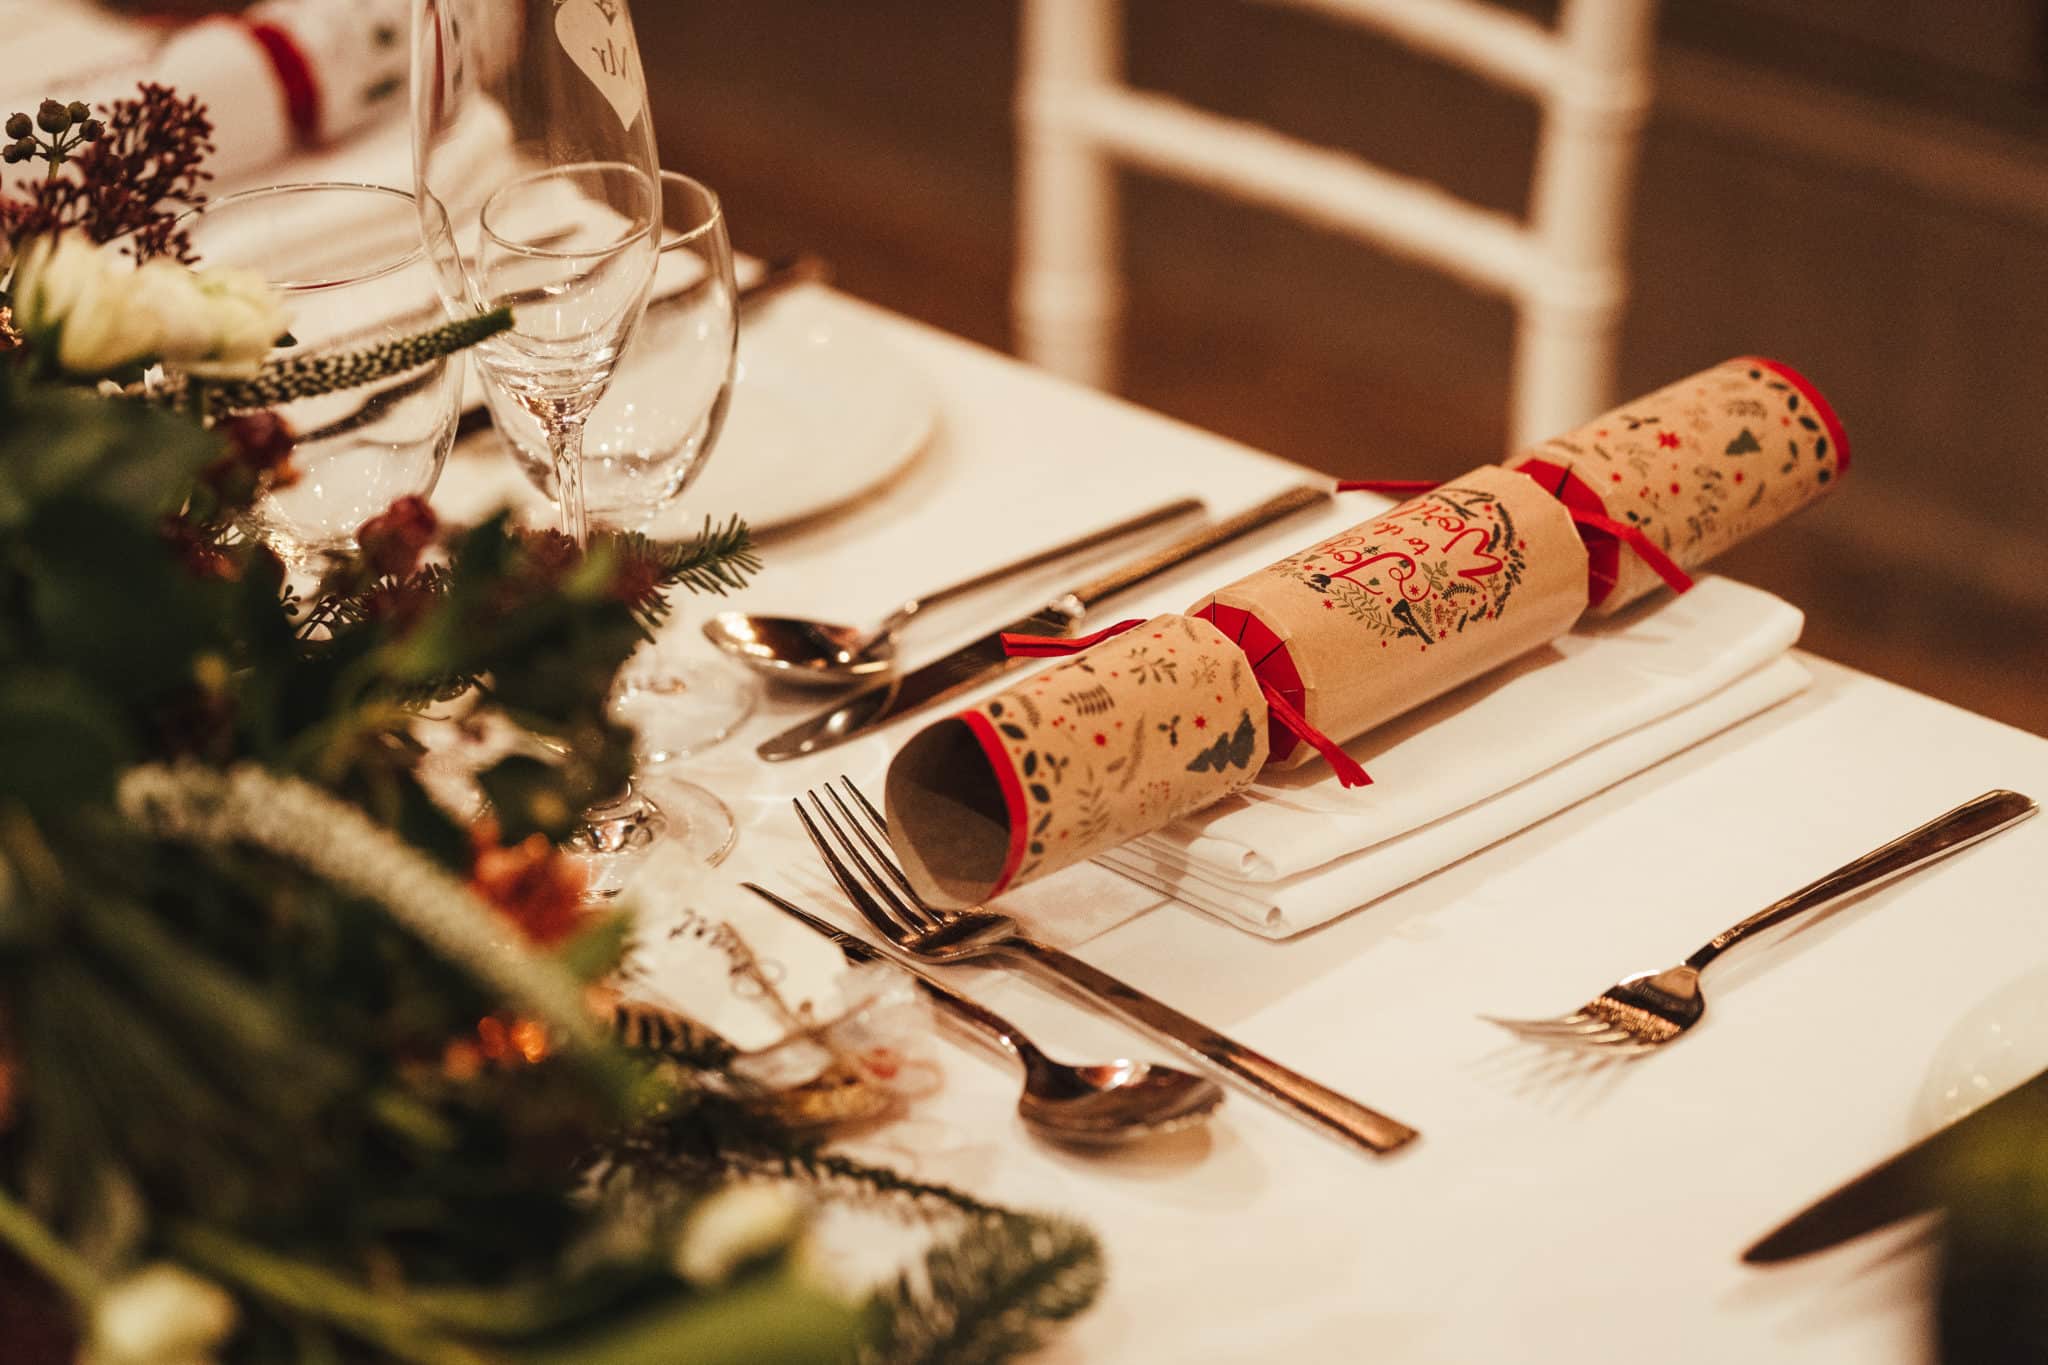 Christmas cracker and a Christmas wreath resting on a table